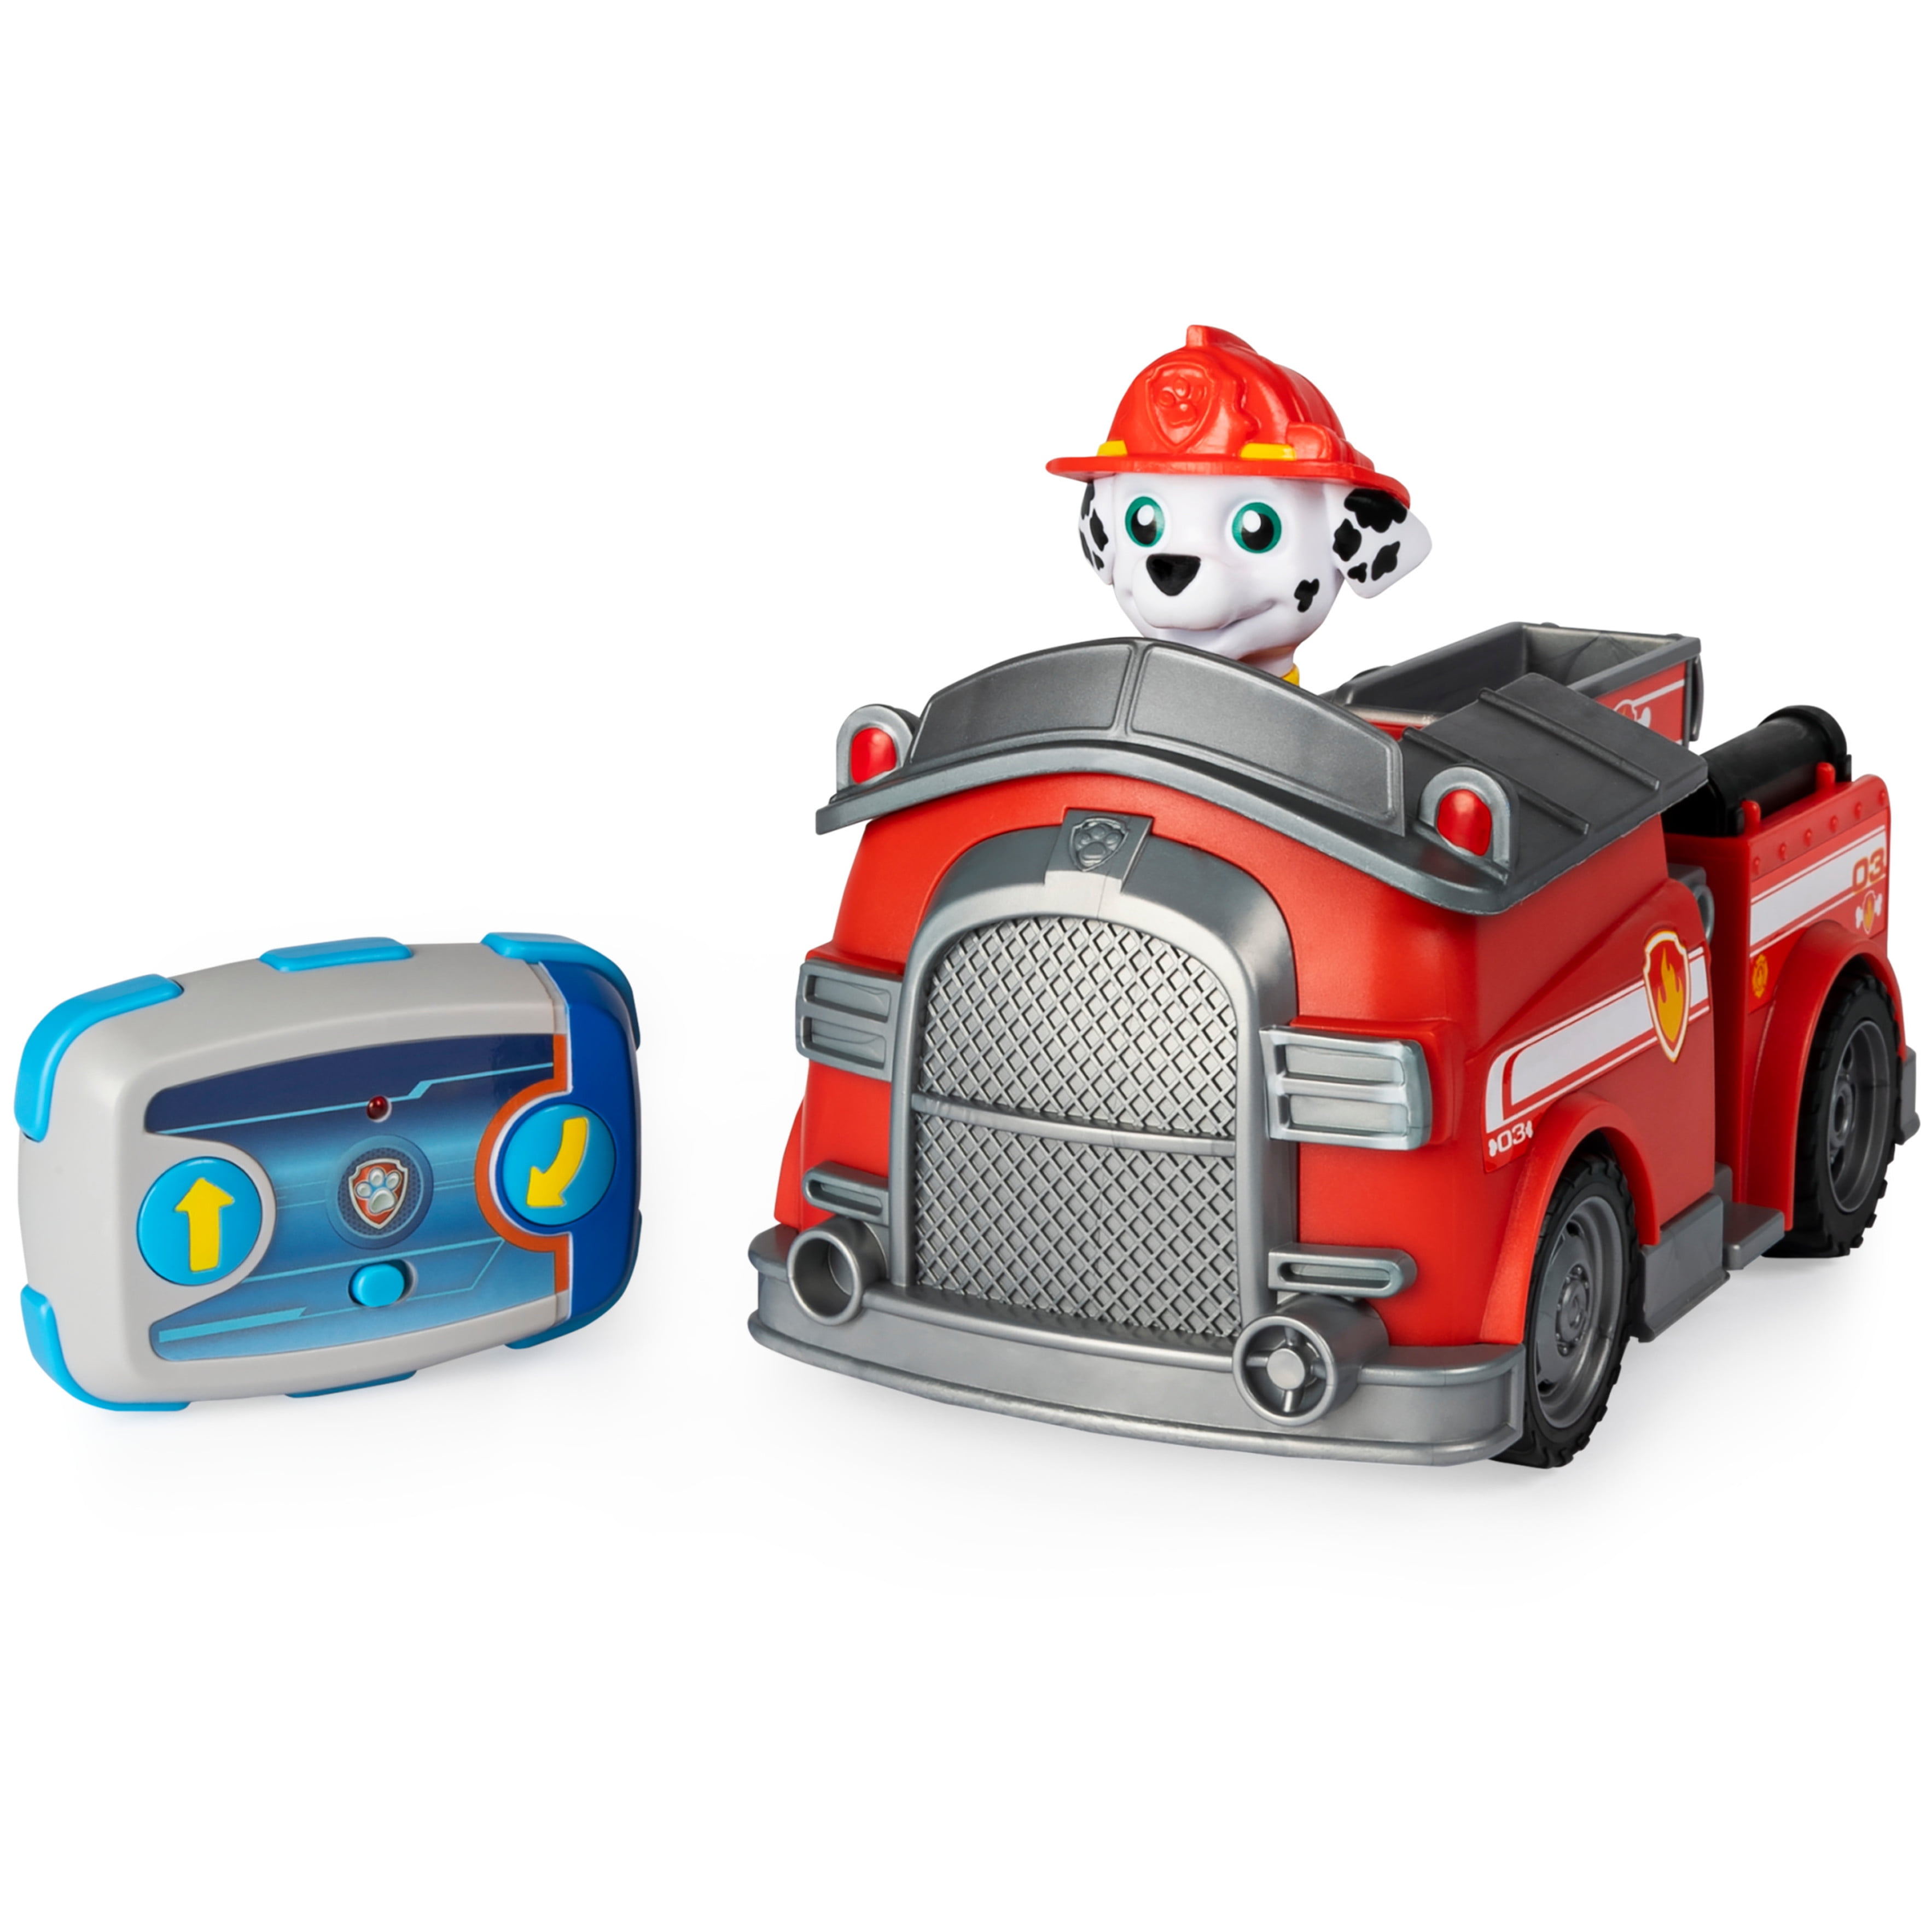 Paw patrol marshall remote control fire truck with